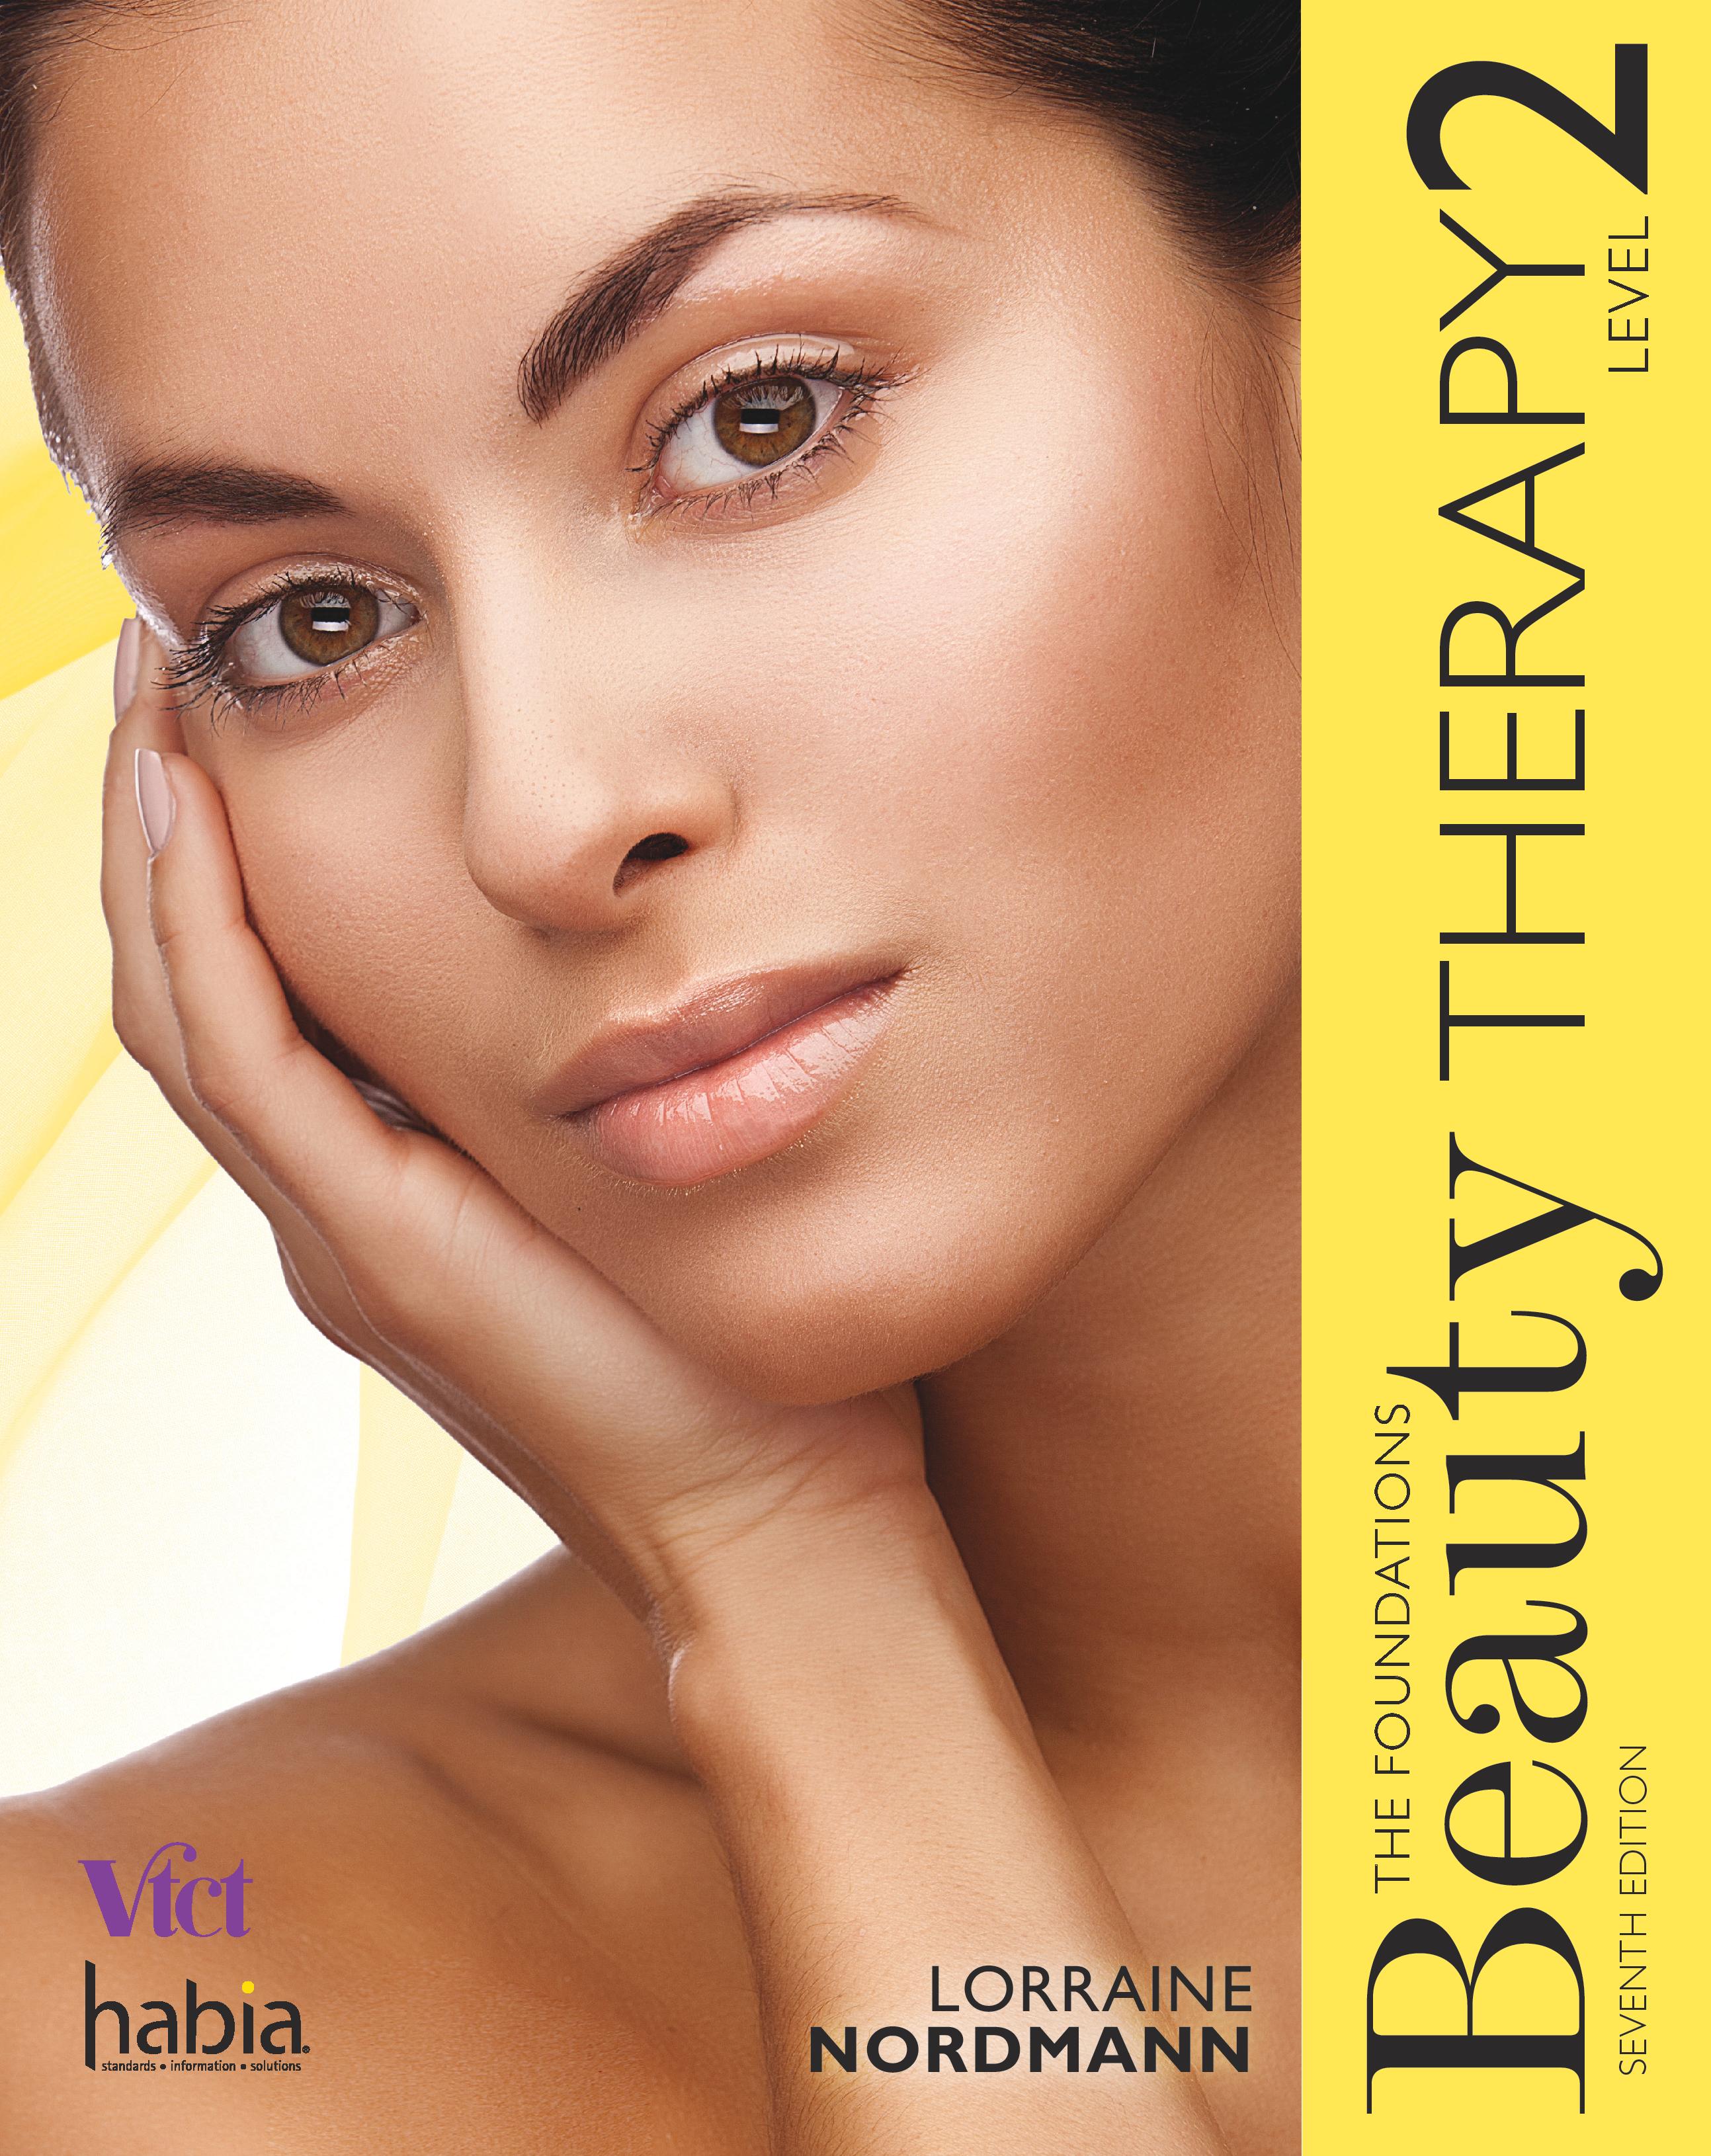 Form 002 - NVQ Level 2 Beauty Therapy